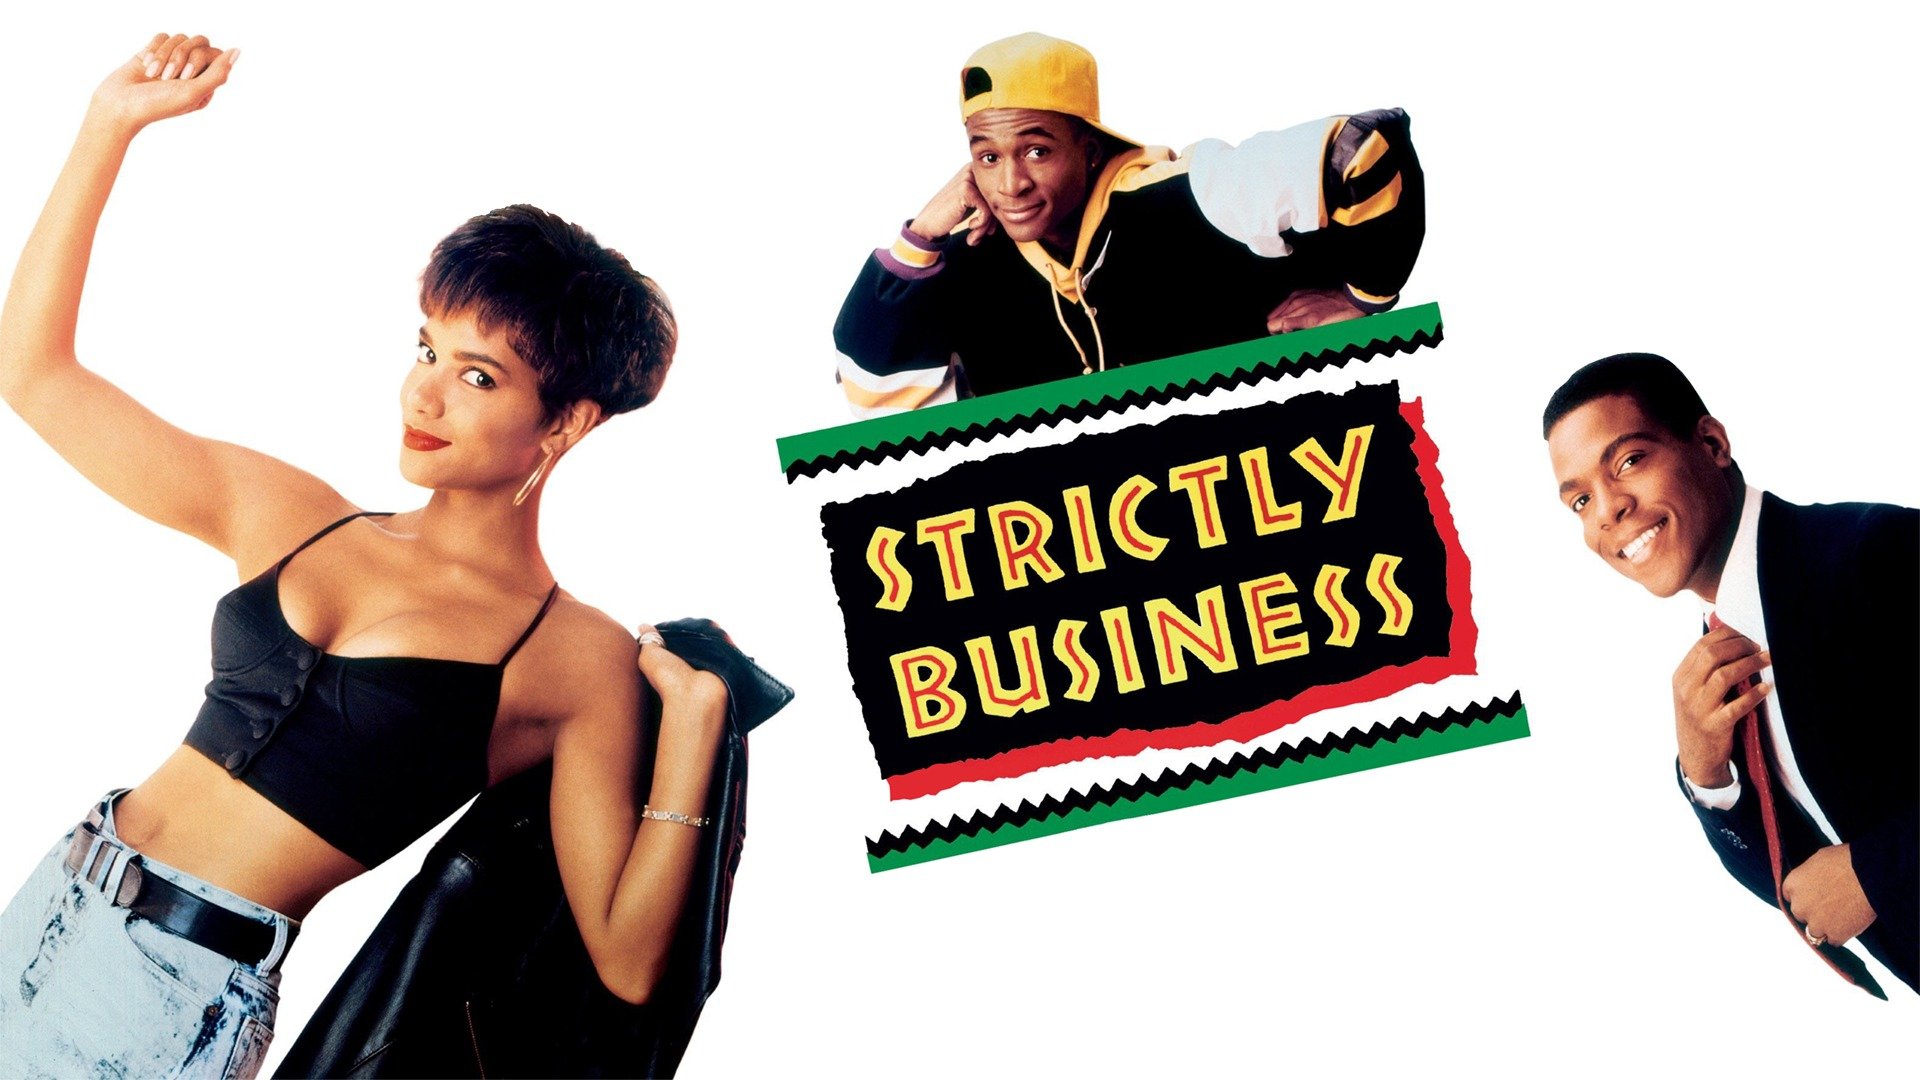 strictly business movie